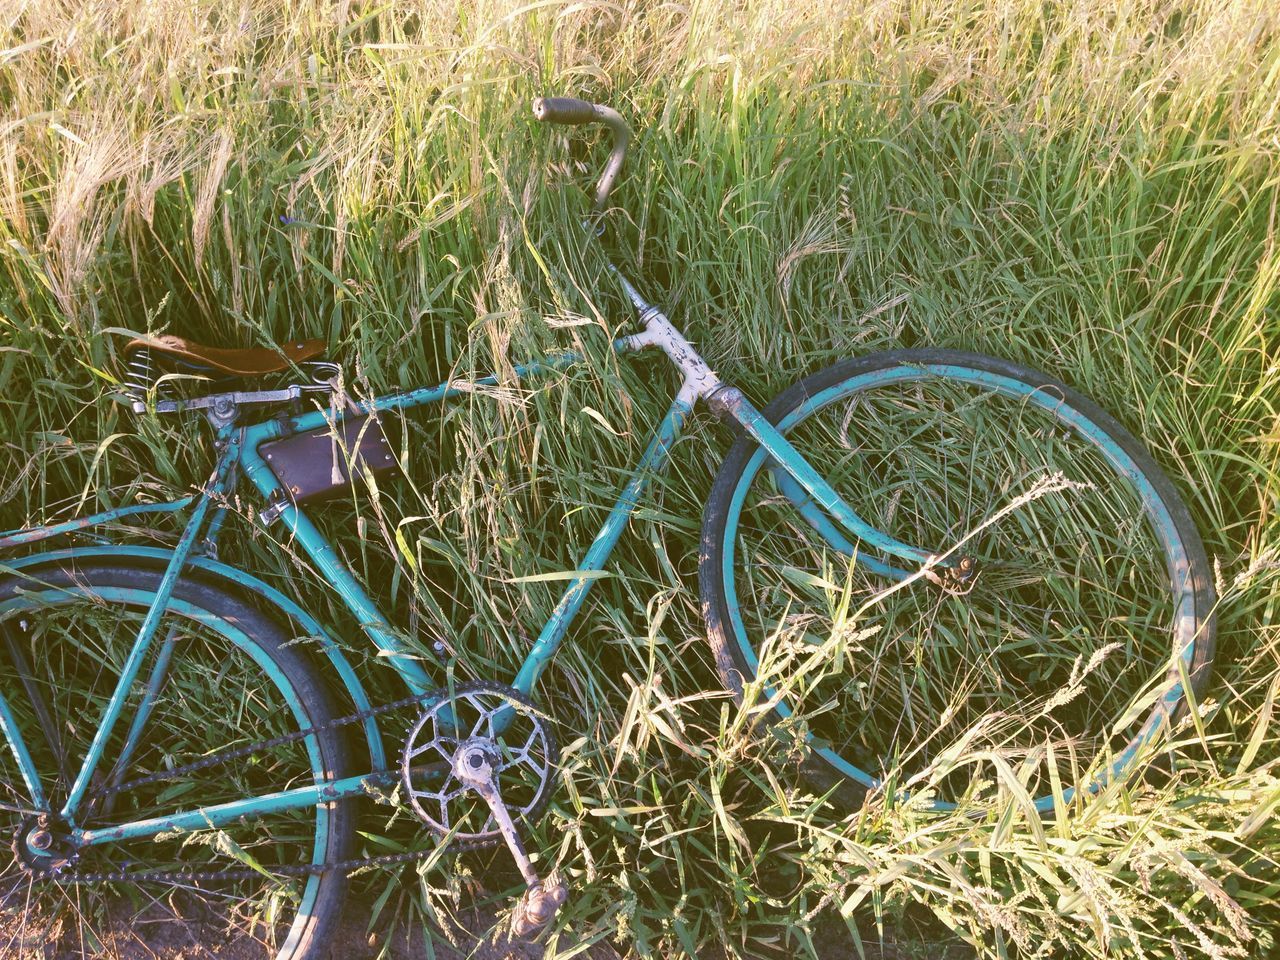 bicycle, grass, high angle view, transportation, mode of transport, field, metal, wheel, abandoned, land vehicle, day, outdoors, no people, stationary, damaged, plant, old, nature, sunlight, tire